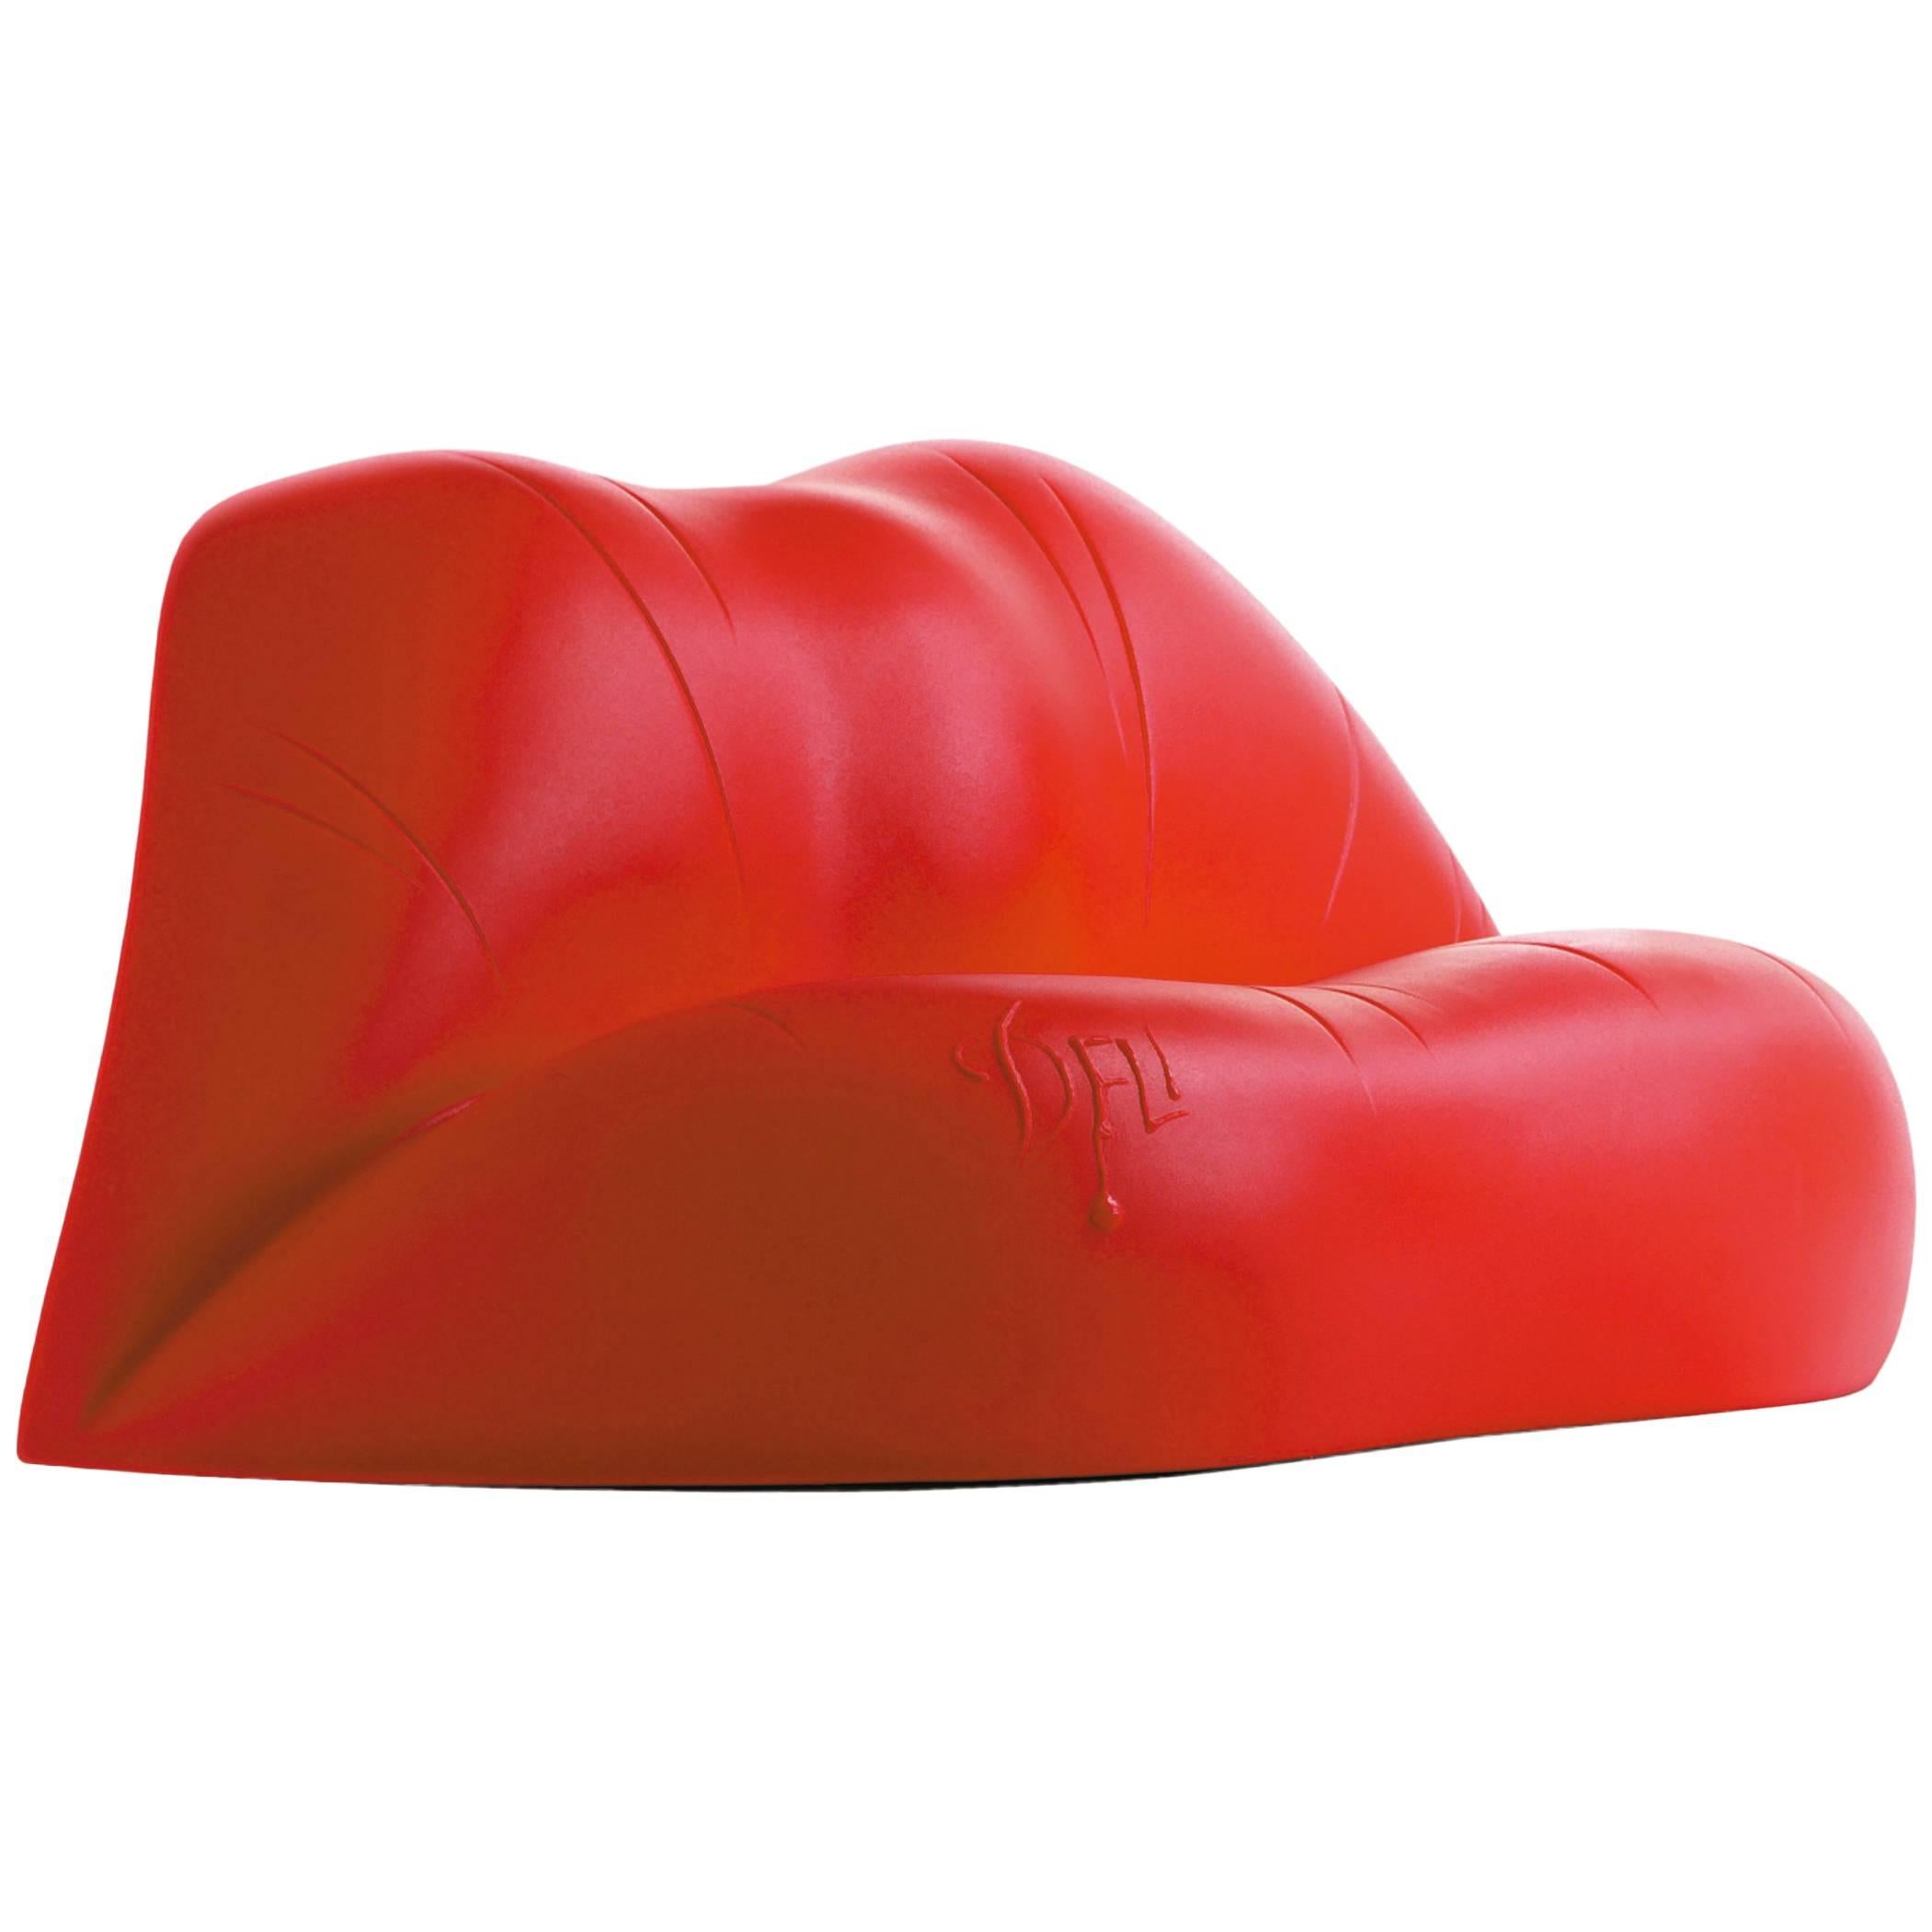 Dalilips designed by Salvador Dali for BD design.

Two-seat sofa made of polyethylene with rotational moulding process. Color red.

Measures: 100 x 170 x 73 H cm.

Is the famous sofa in the shape of a mouth which the artist created together